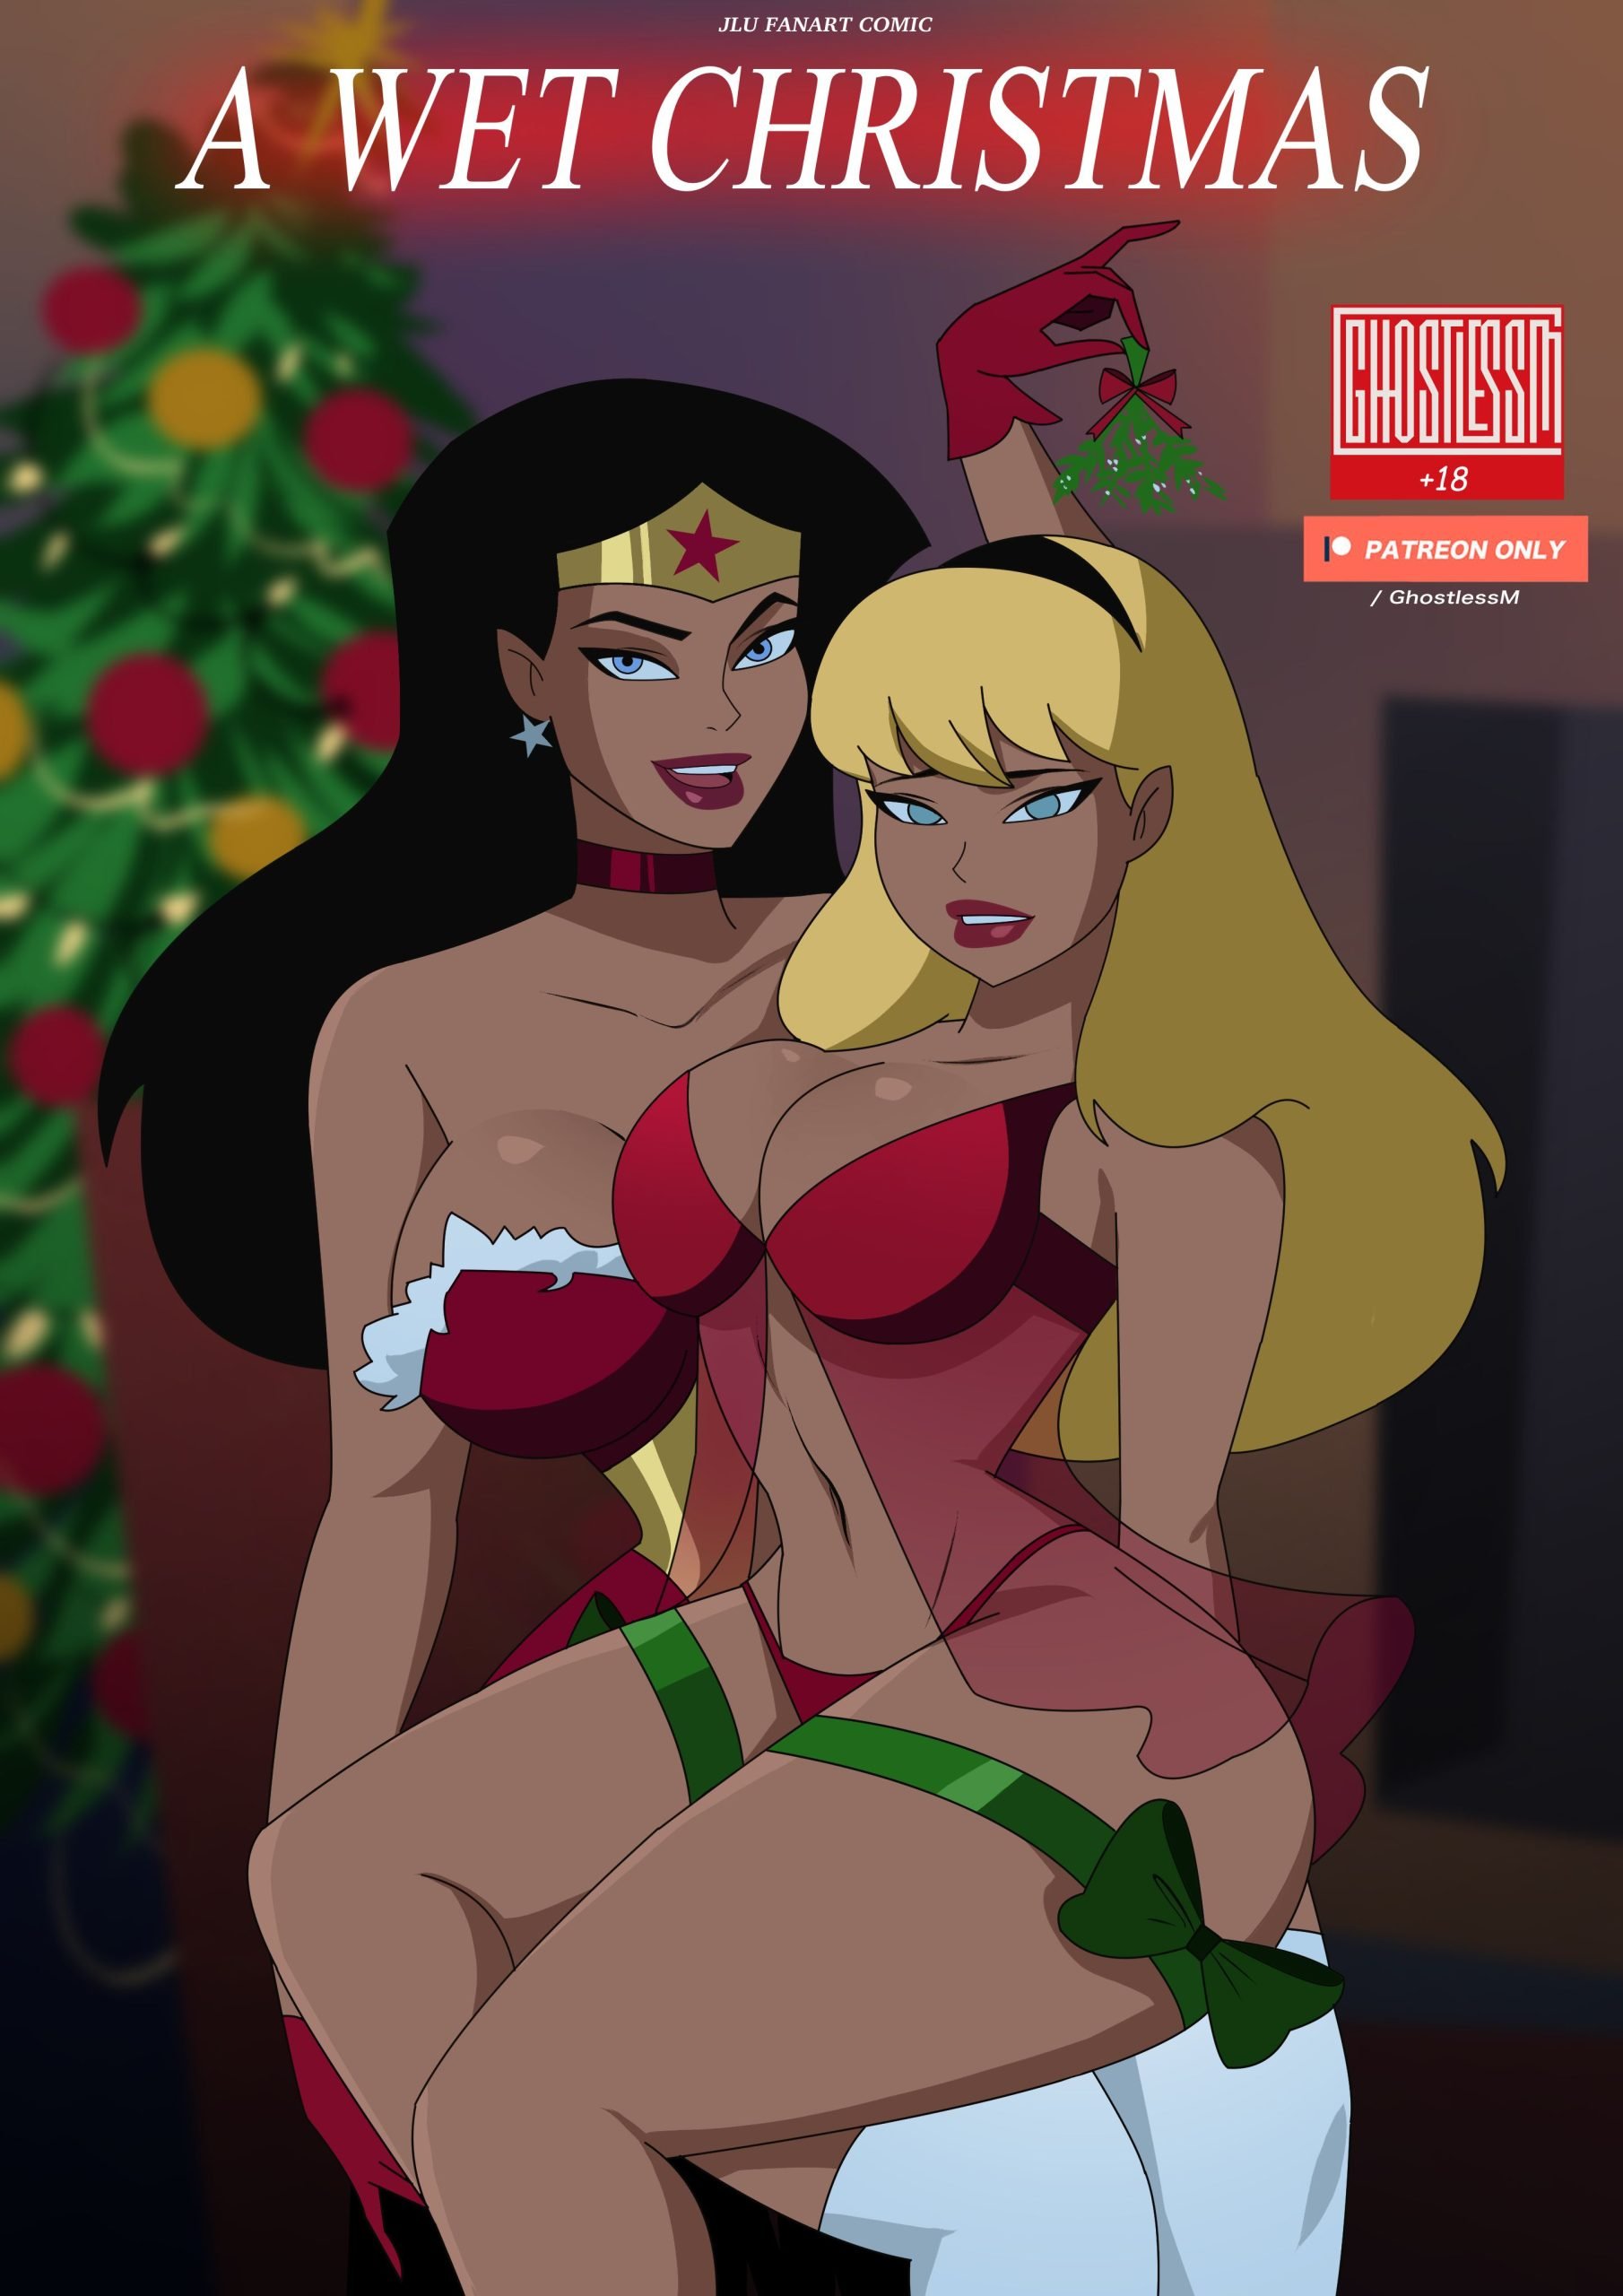 A Wet Christmas (Justice League) GhostlessM Porn Comic image